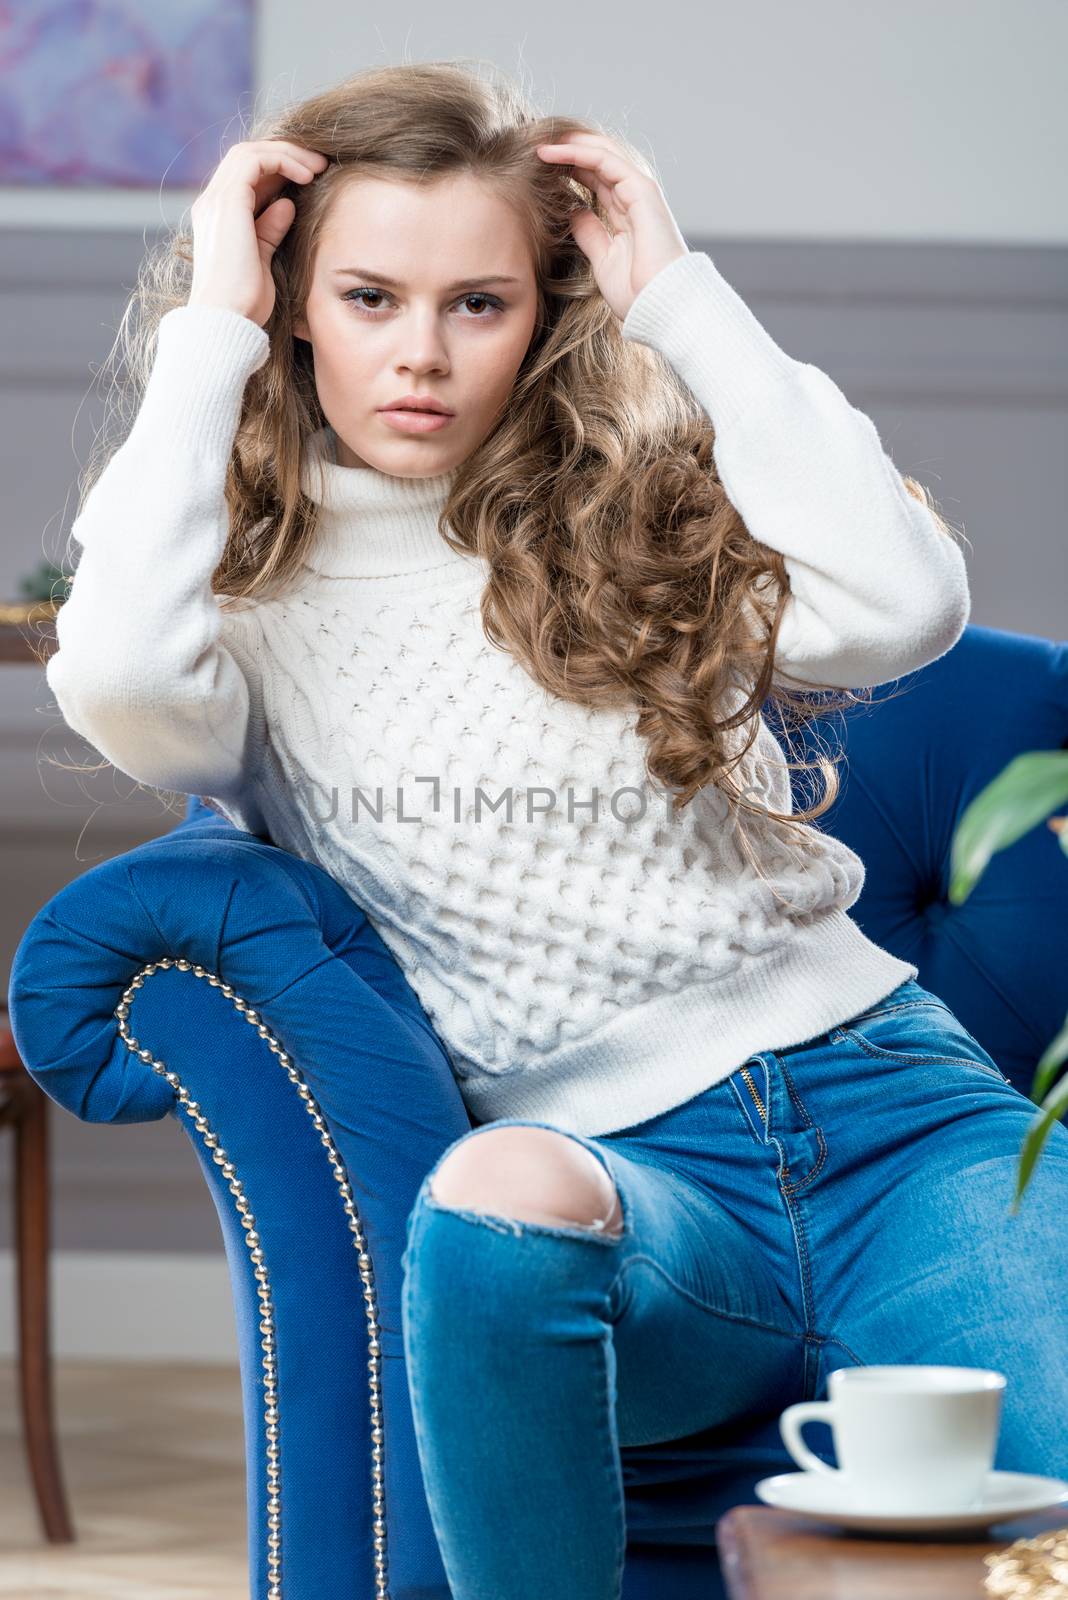 charming young girl sitting in living room on blue couch and pos by kosmsos111